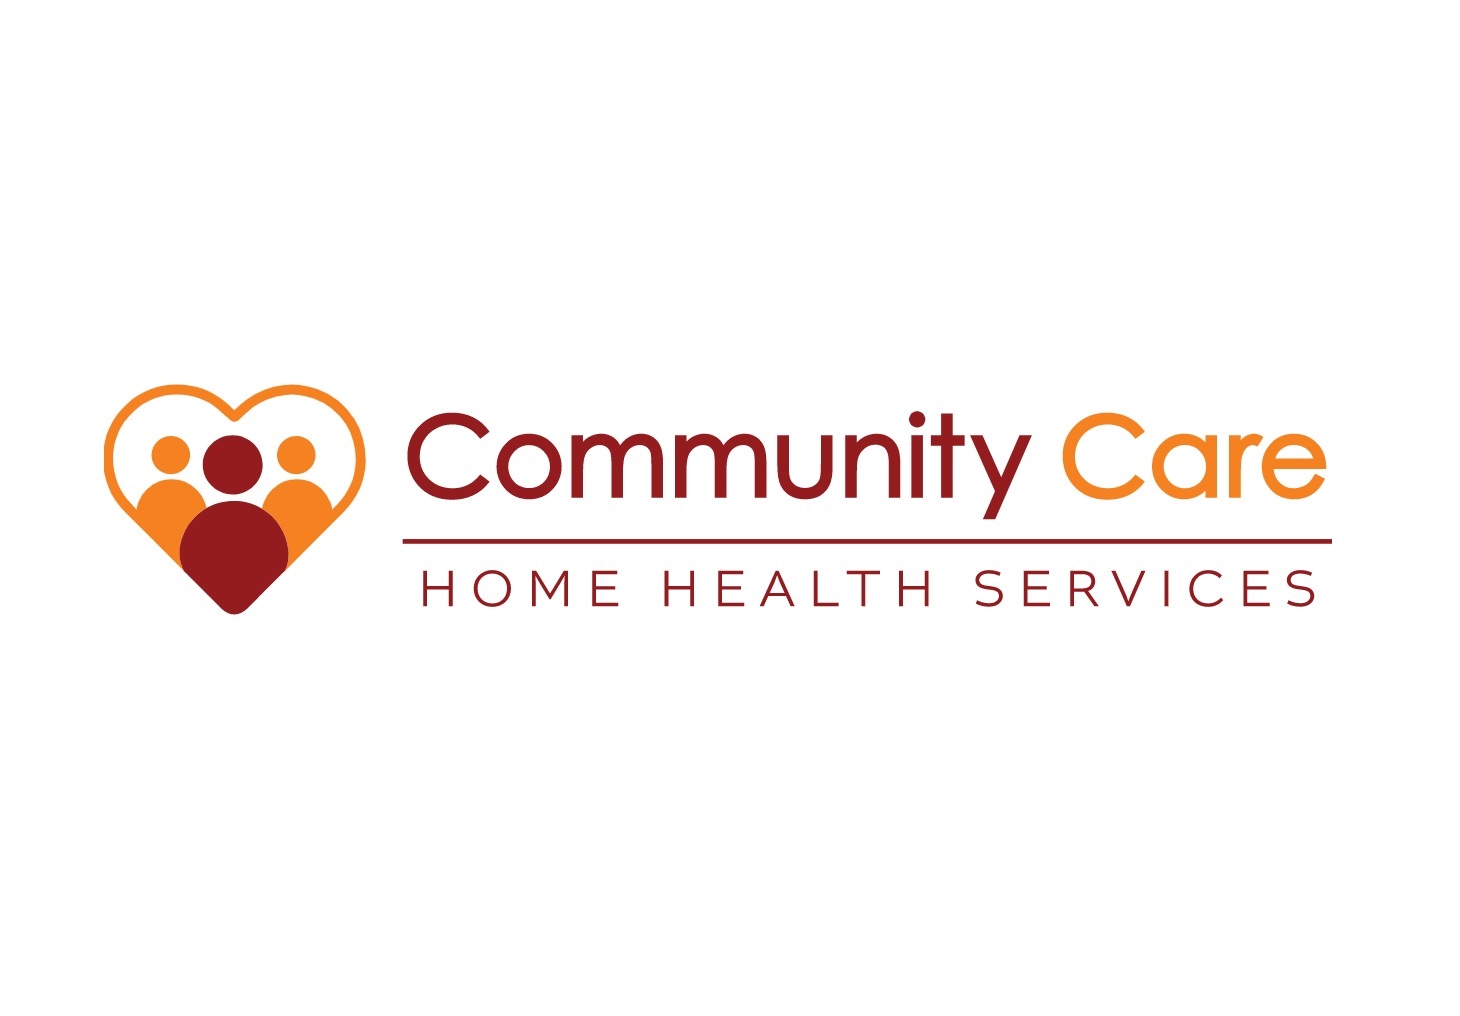 Community Care Home Health Services image